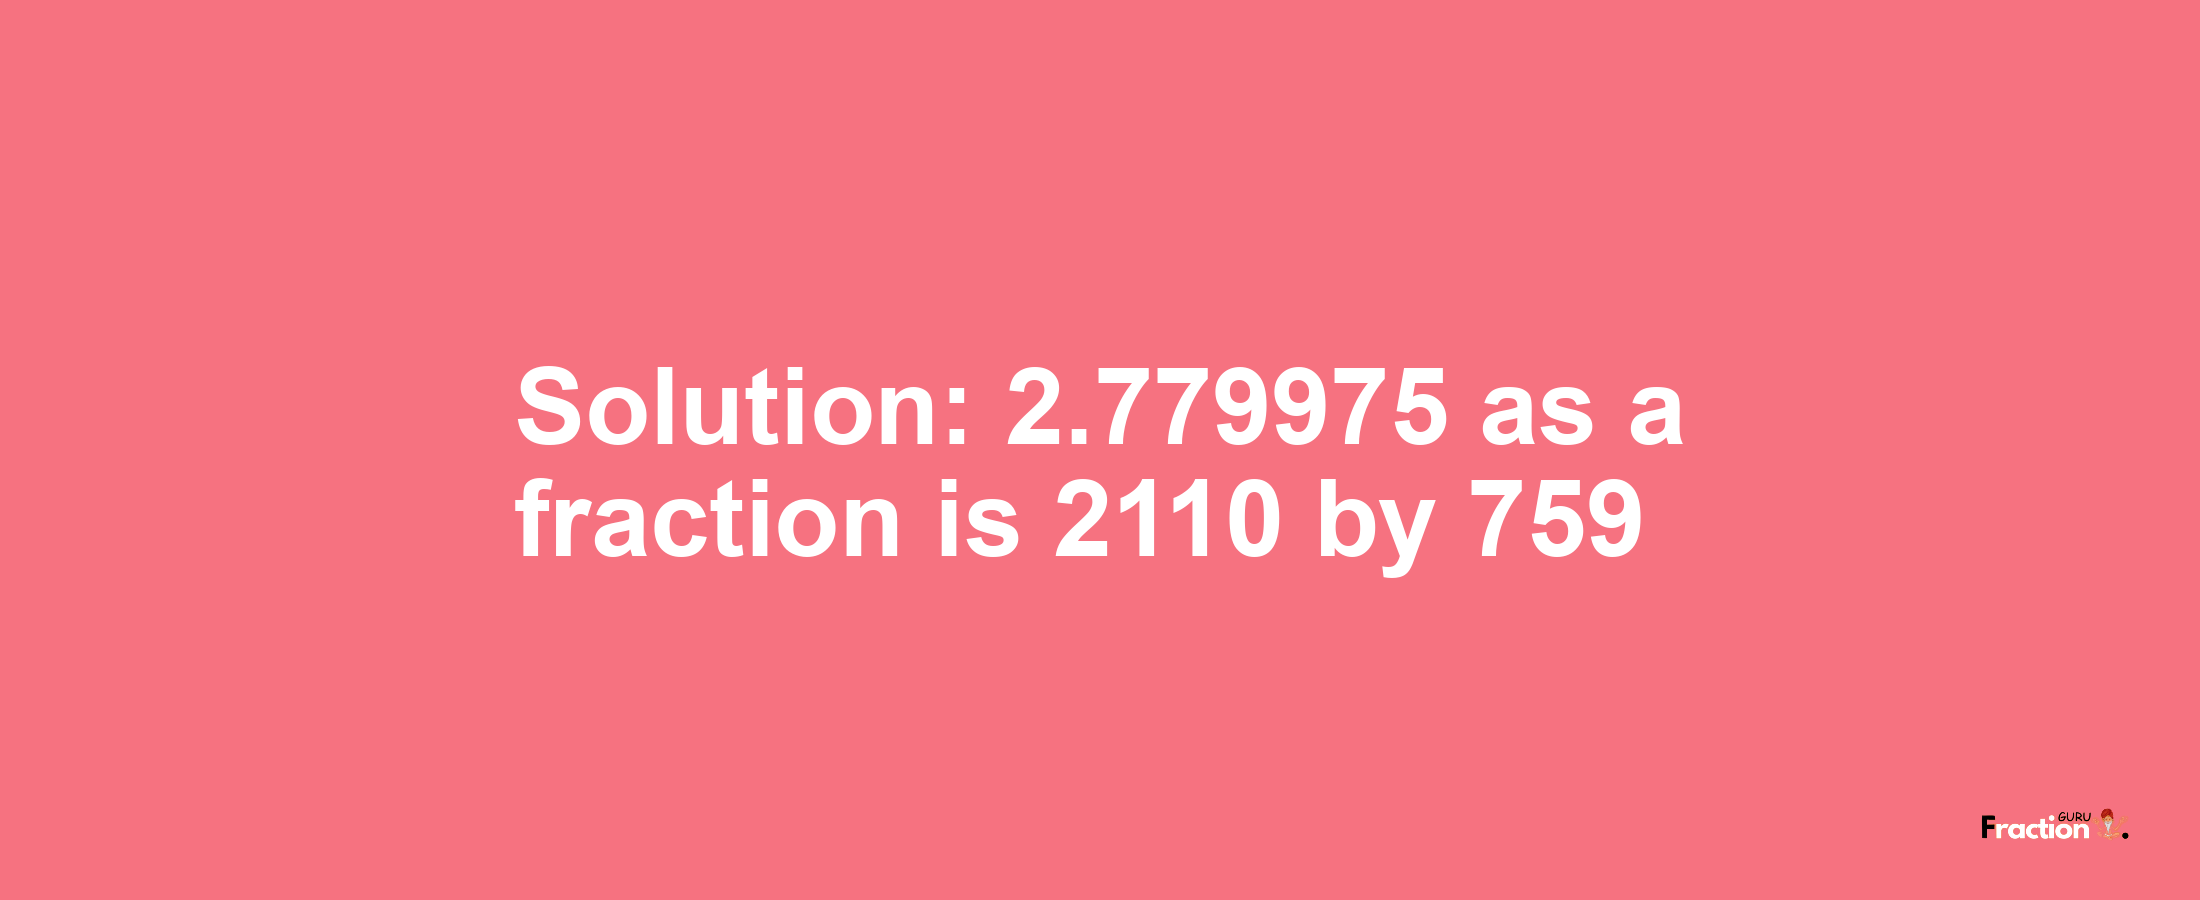 Solution:2.779975 as a fraction is 2110/759